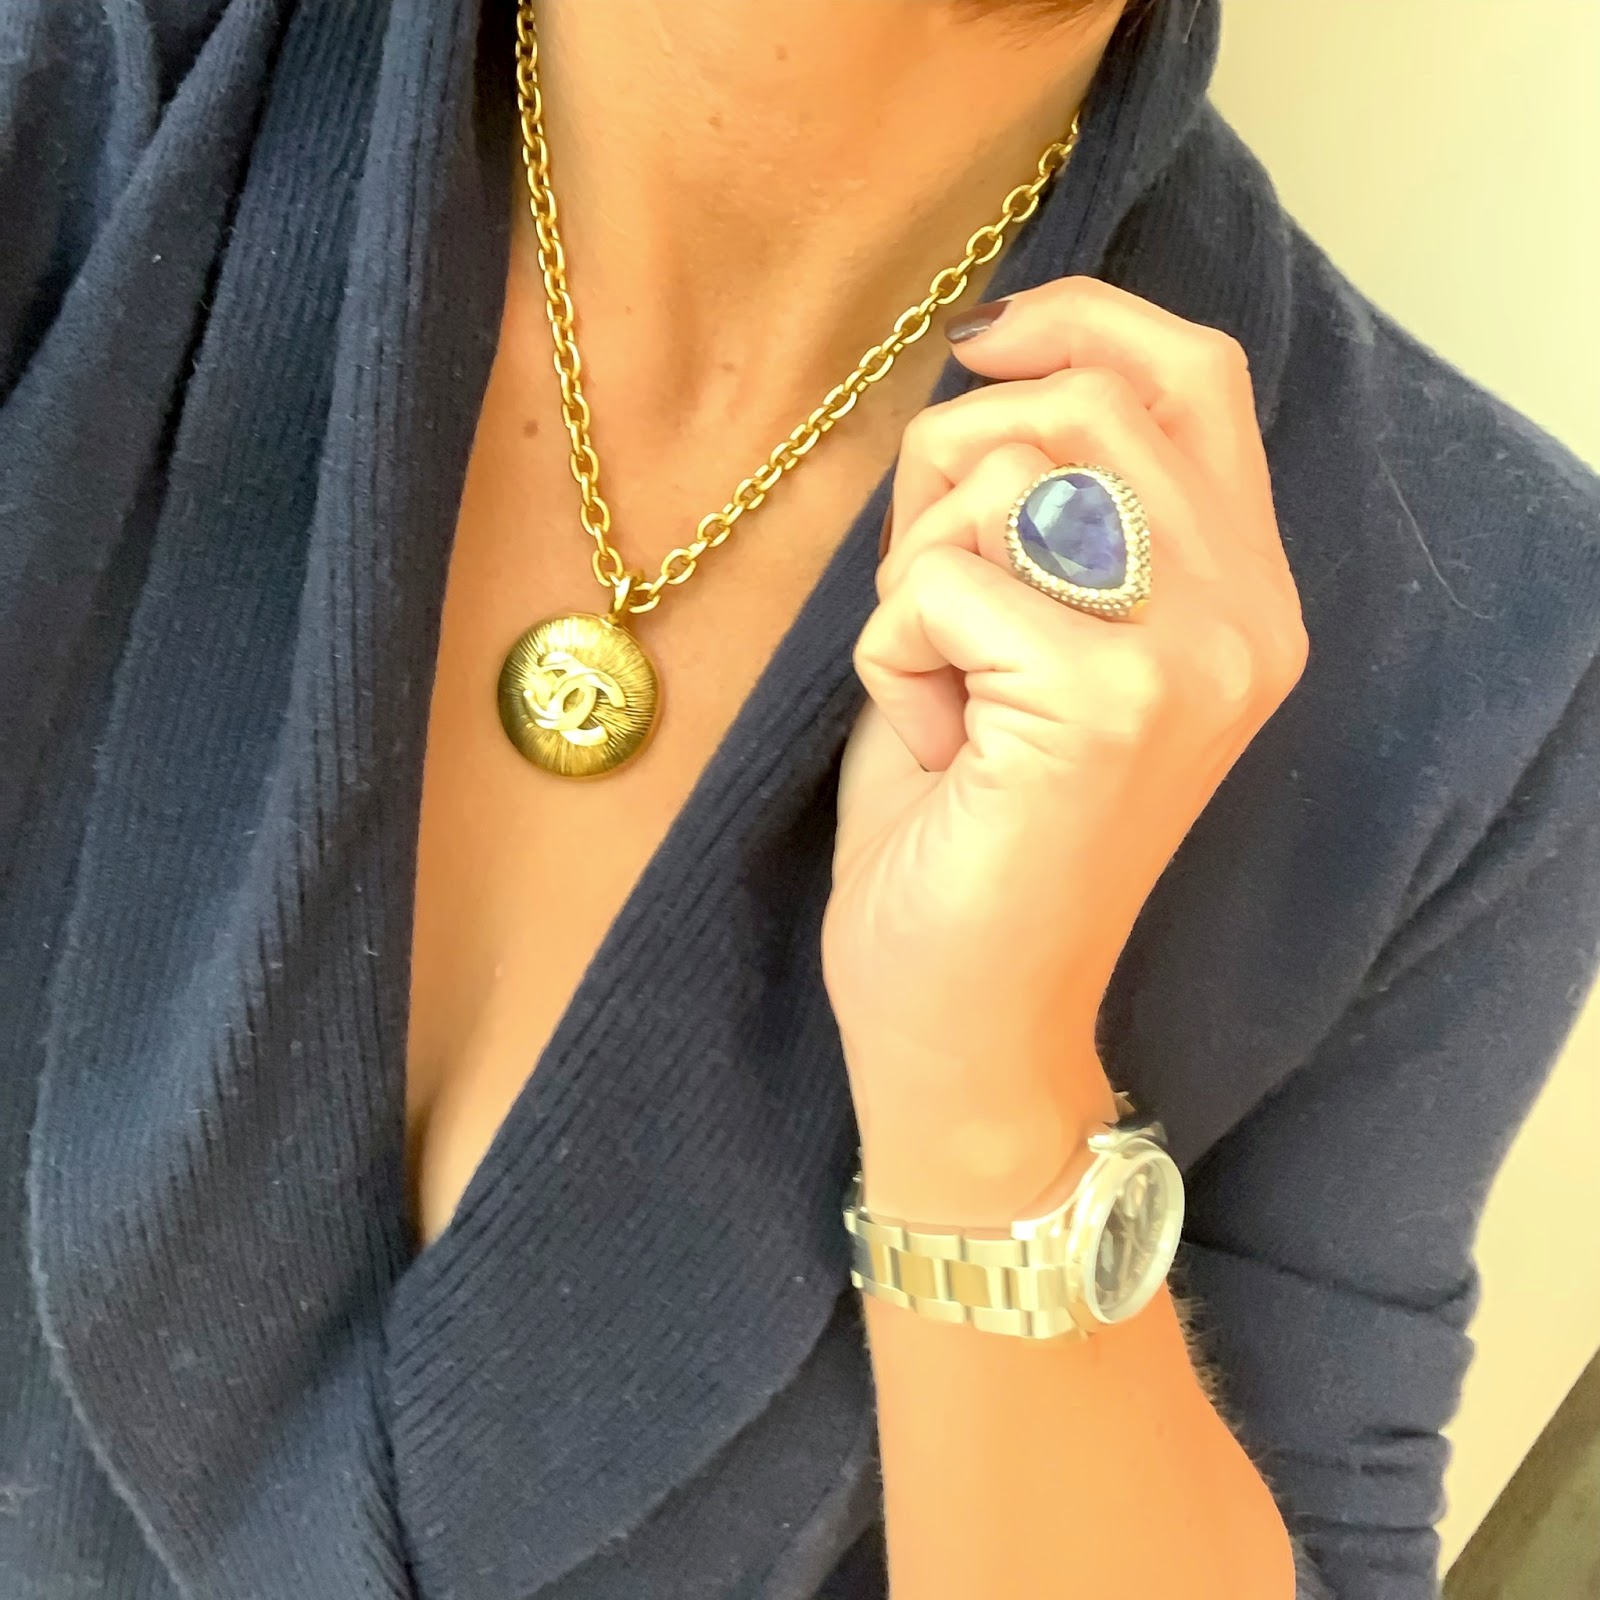 my midlife fashion, chanel vintage necklace, ralph lauren double breasted cardigan, j crew toothpick 8 inch jeans, loel and co large sapphire ring, charlotte olympia kitty flat shoes